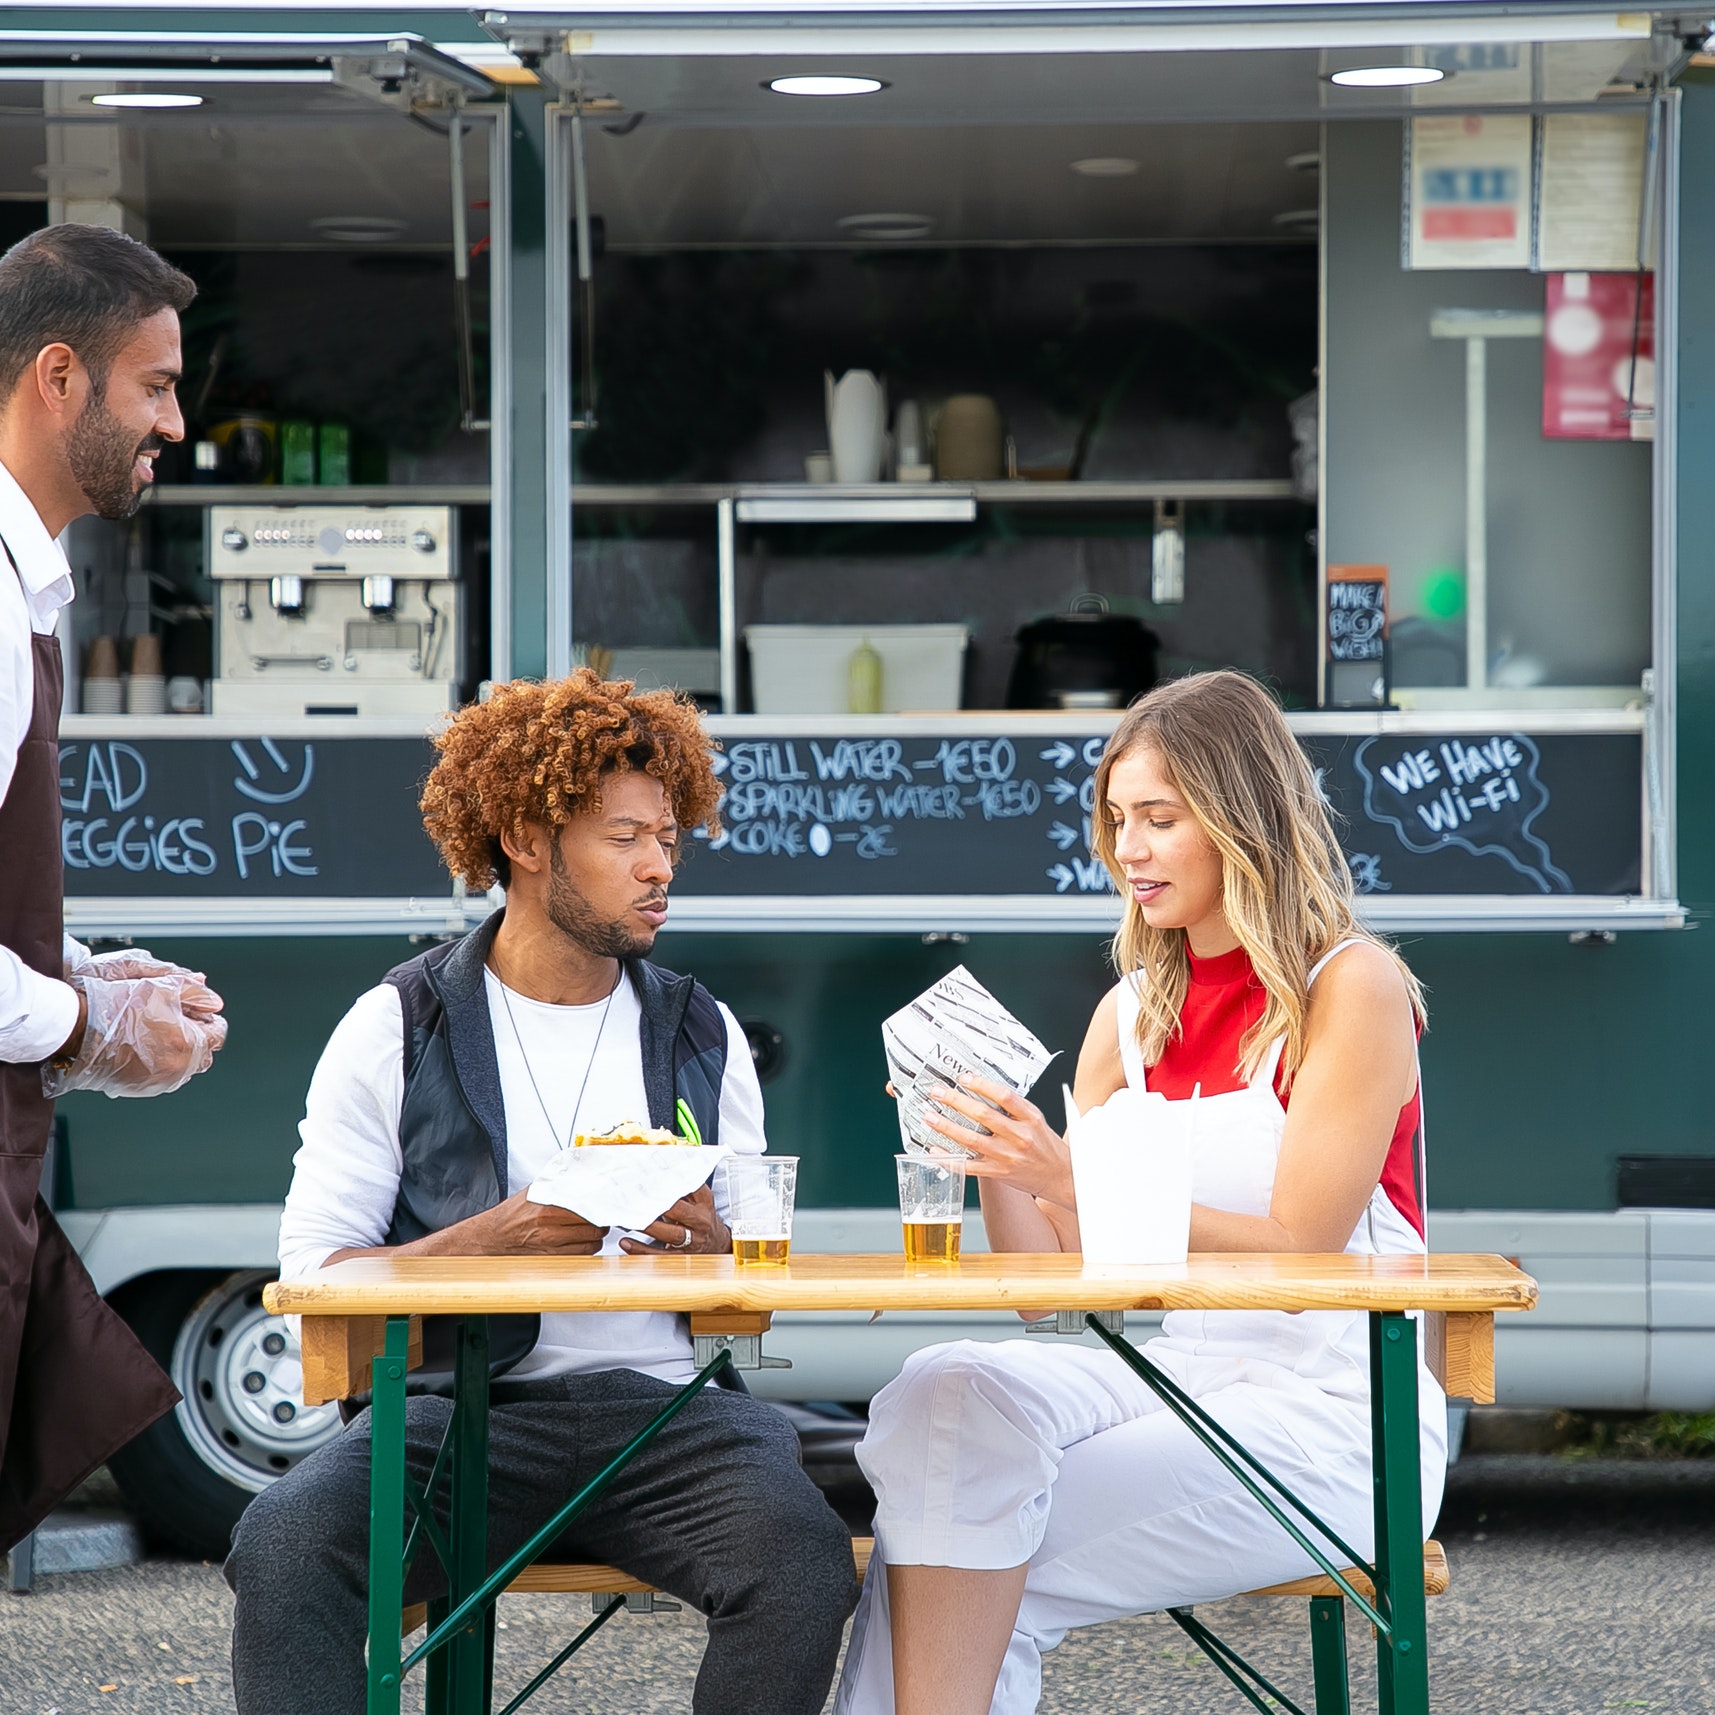 Two friends eating at a table in front of a food truck